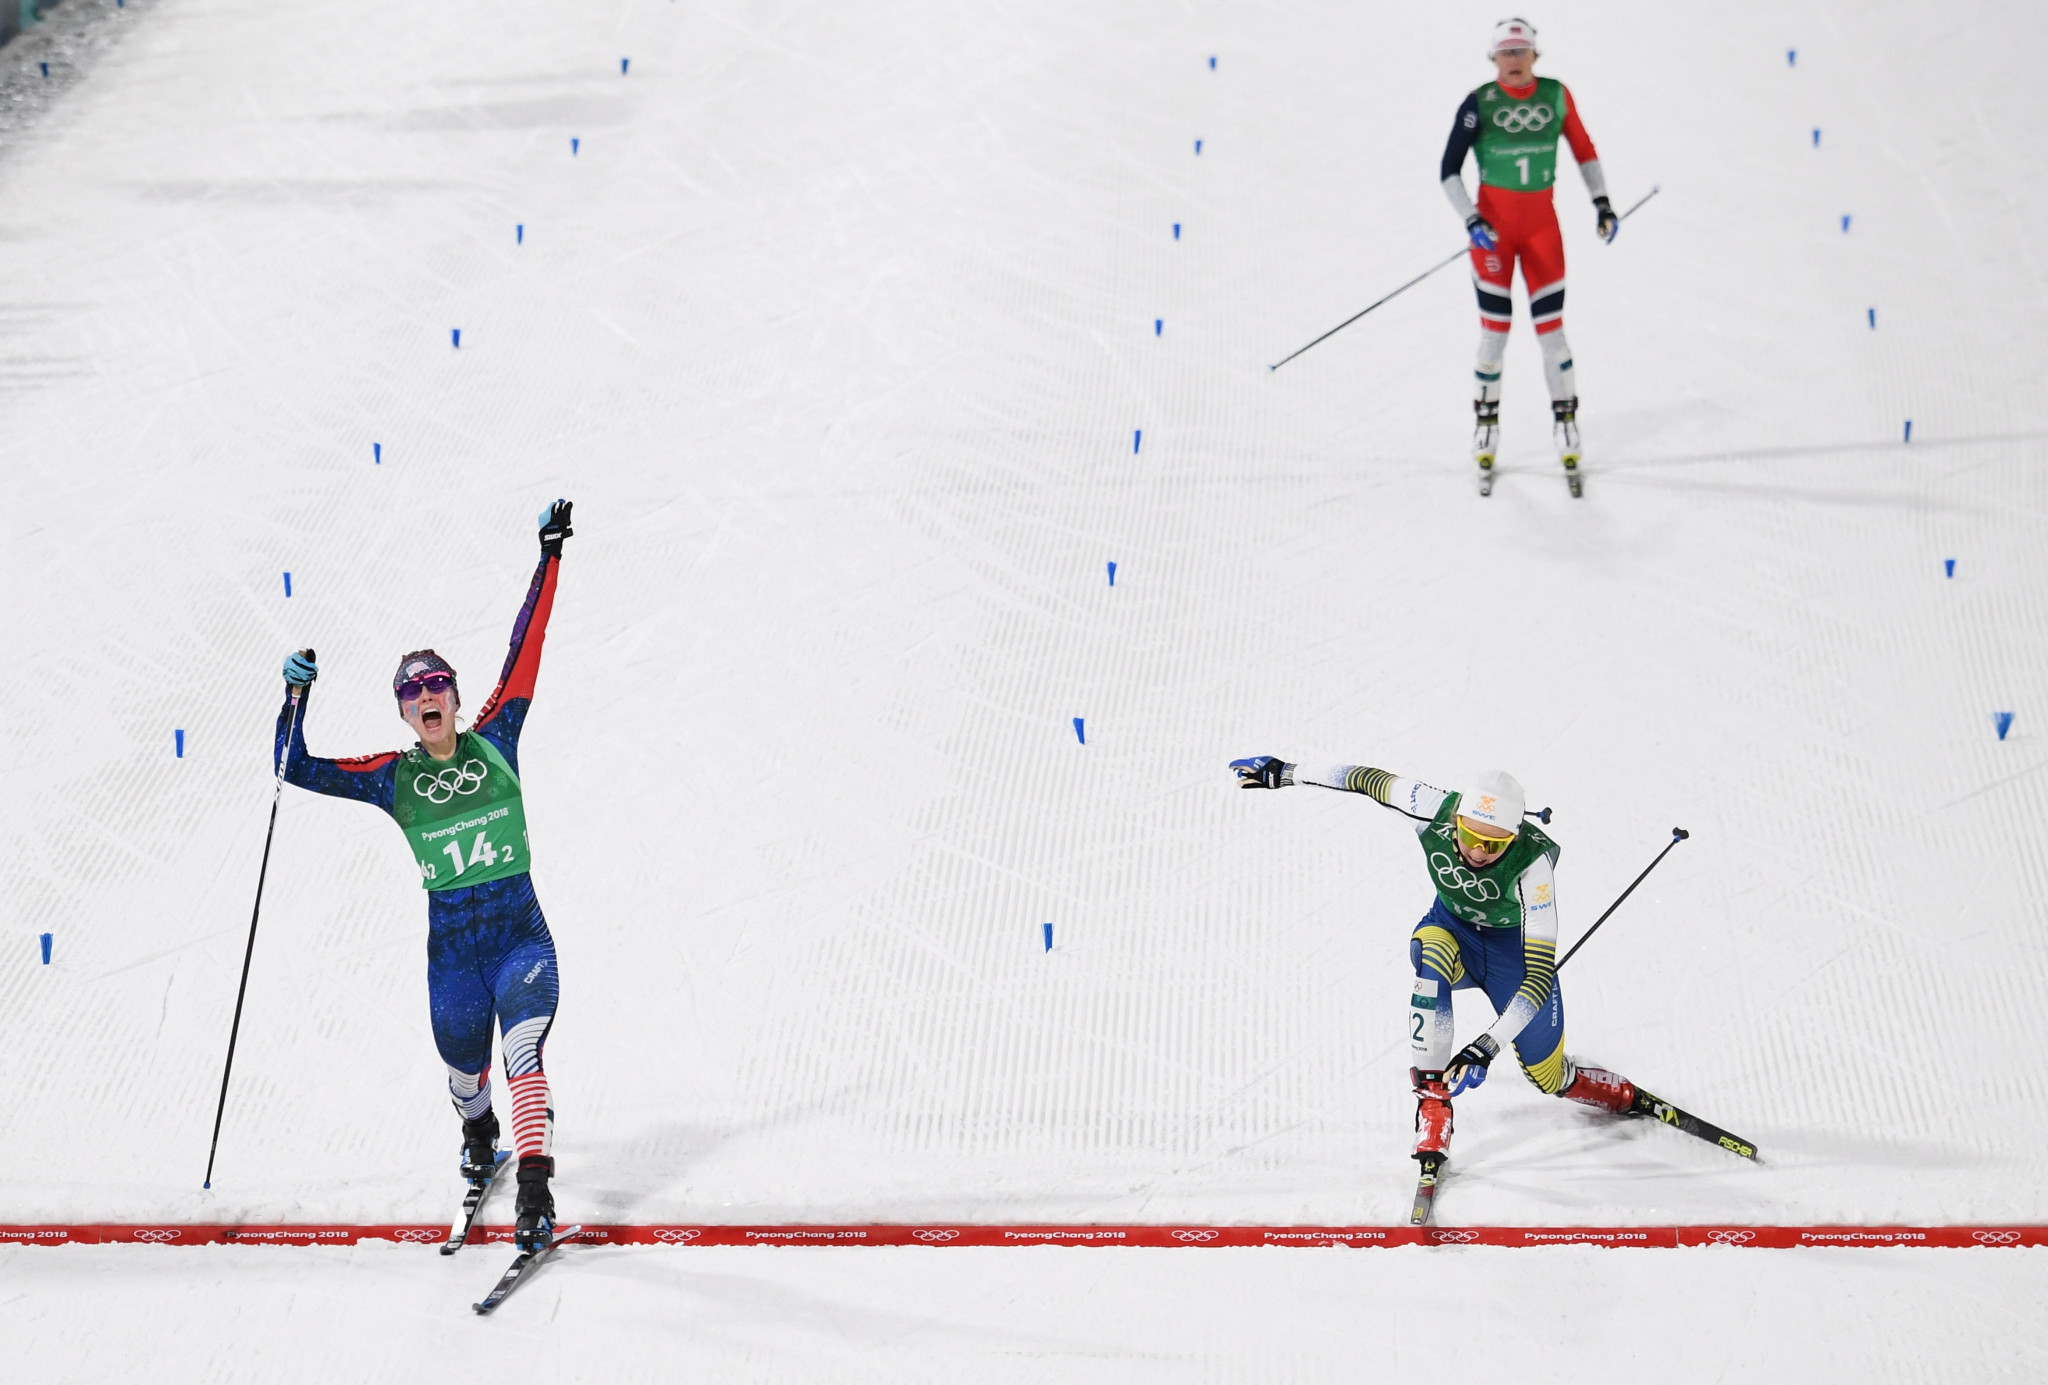 Jessica Diggins celebrates after sealing the United States' victory in the women’s cross-country skiing team sprint freestyle event at Pyeongchang 2018 ©Getty Images